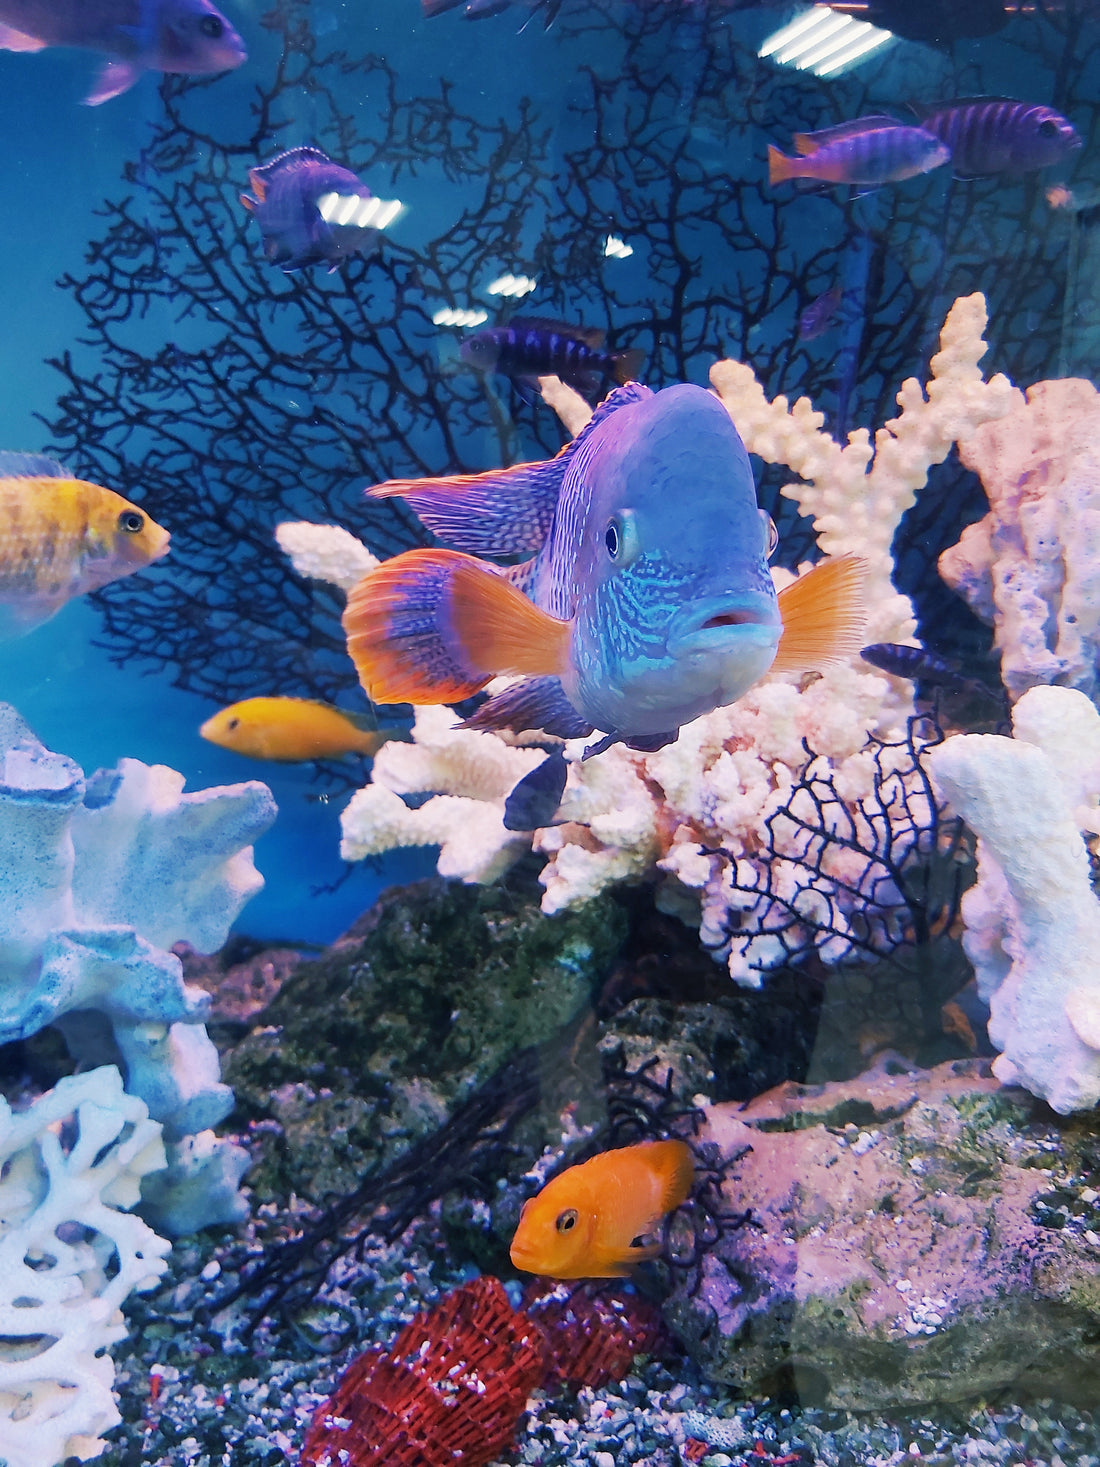 Coral Reef Private Lesson starting at $9.99